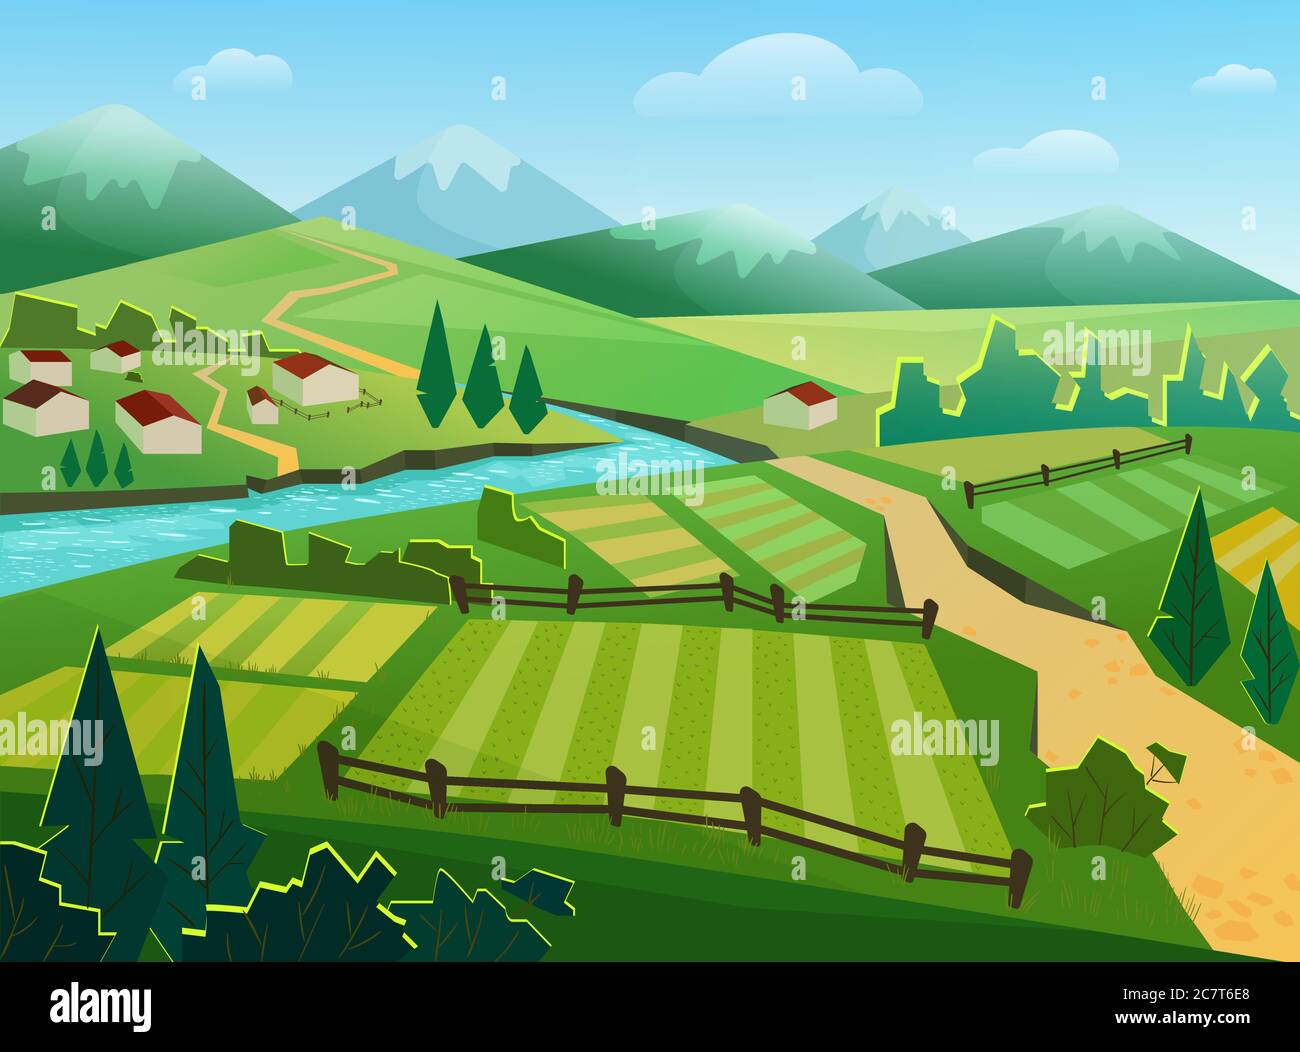 Green fields and mountains flat vector illustration. Rural landscape, countryside, village, small houses, cottages by river. Nature, ecologically clean region, hilly terrain, grassland and riverside Stock Vector